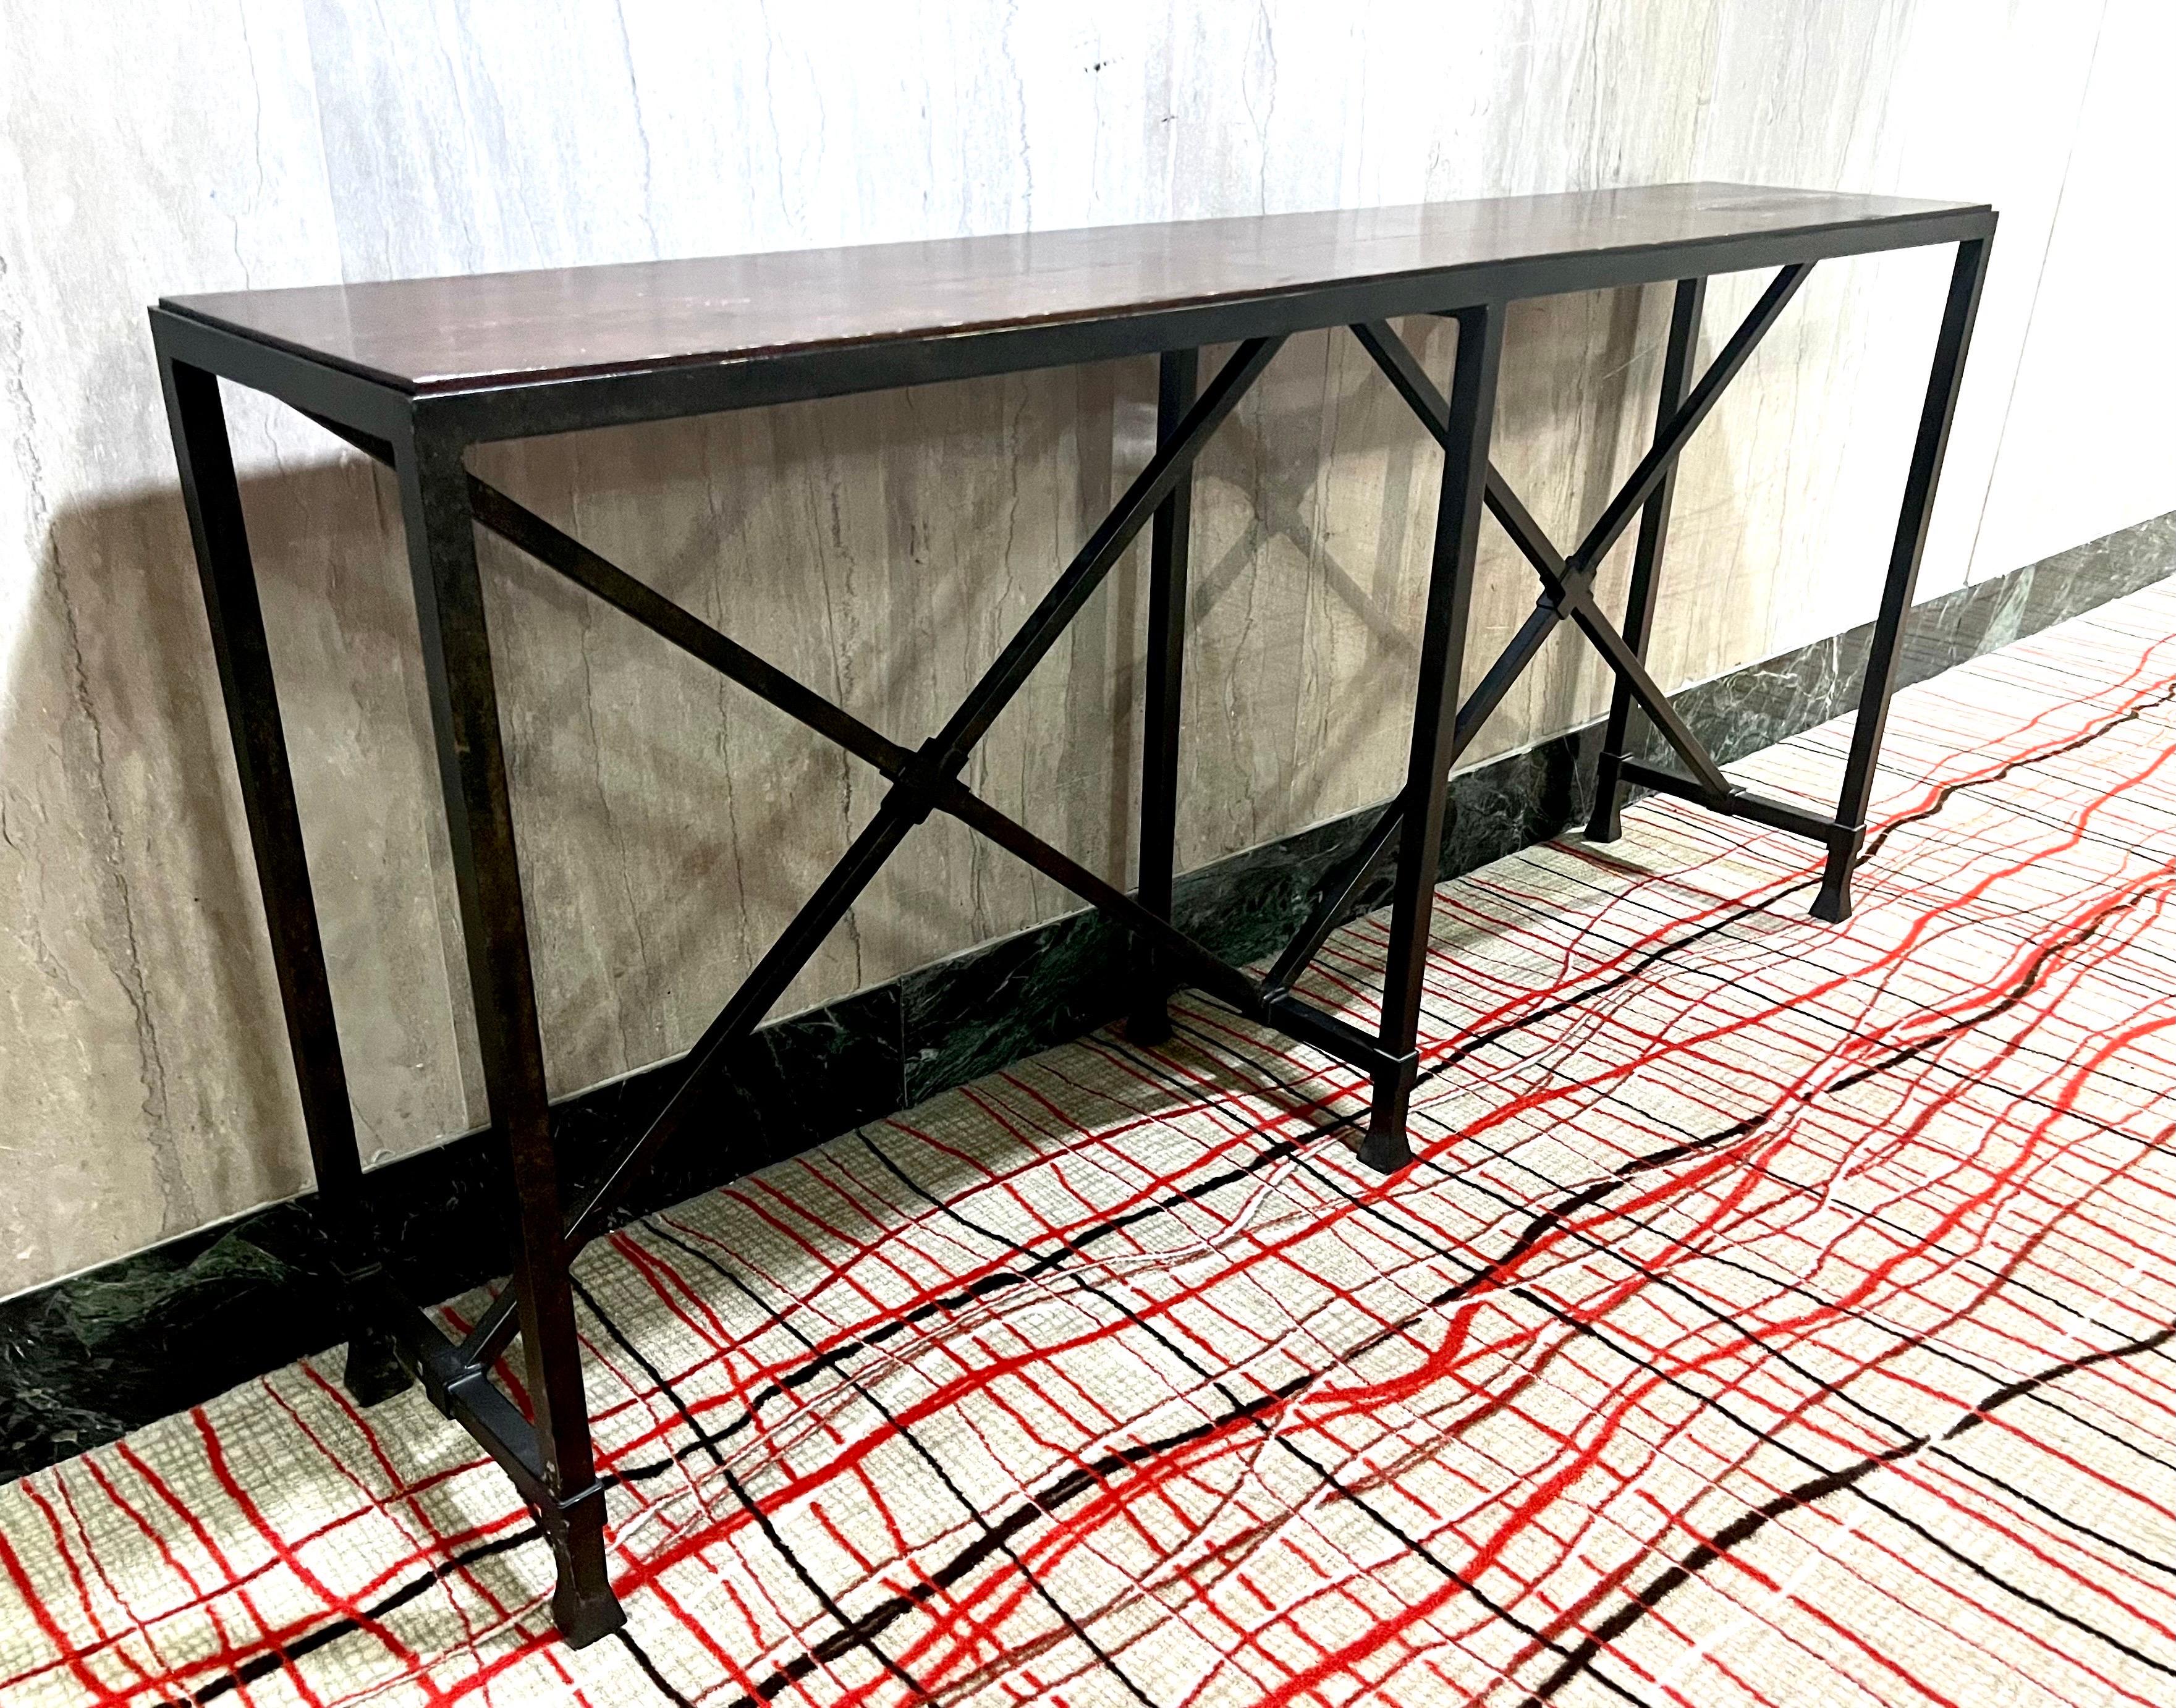 An Elegant, Large, Custom French Modern Neoclassical Console in Hand Hammered Wrought Iron with an Inlaid Stone Top, in the style of French Master Ironworker and Designer, Raymond Subes. The console table embraces dramatic, classic French styling